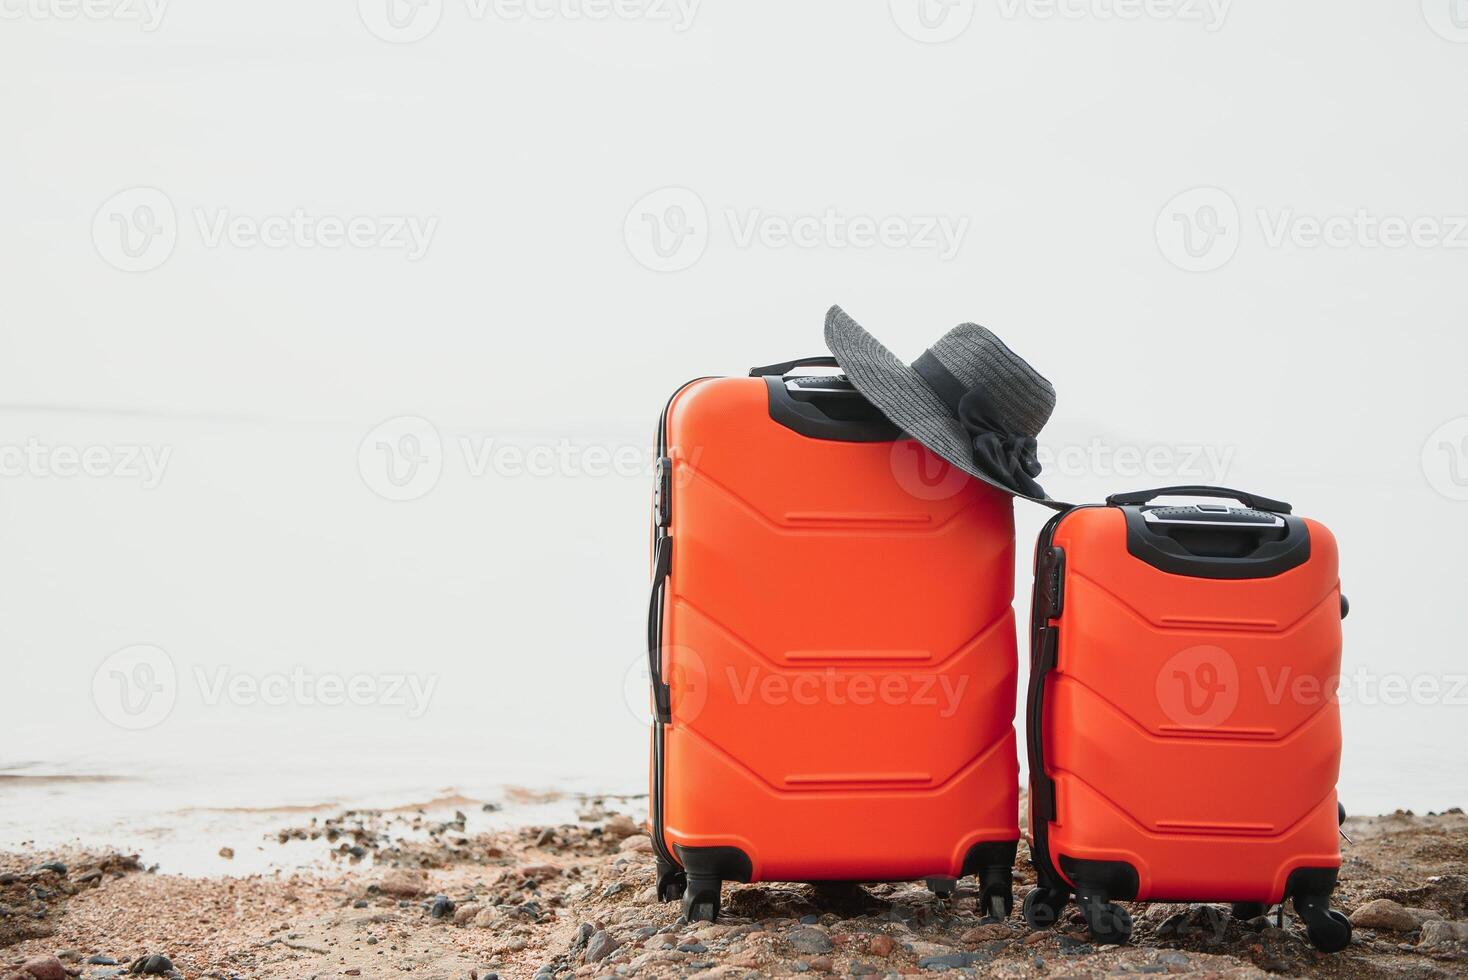 Color travel suitcase on sandy beach with turquoise sea background, summer holidays concept photo